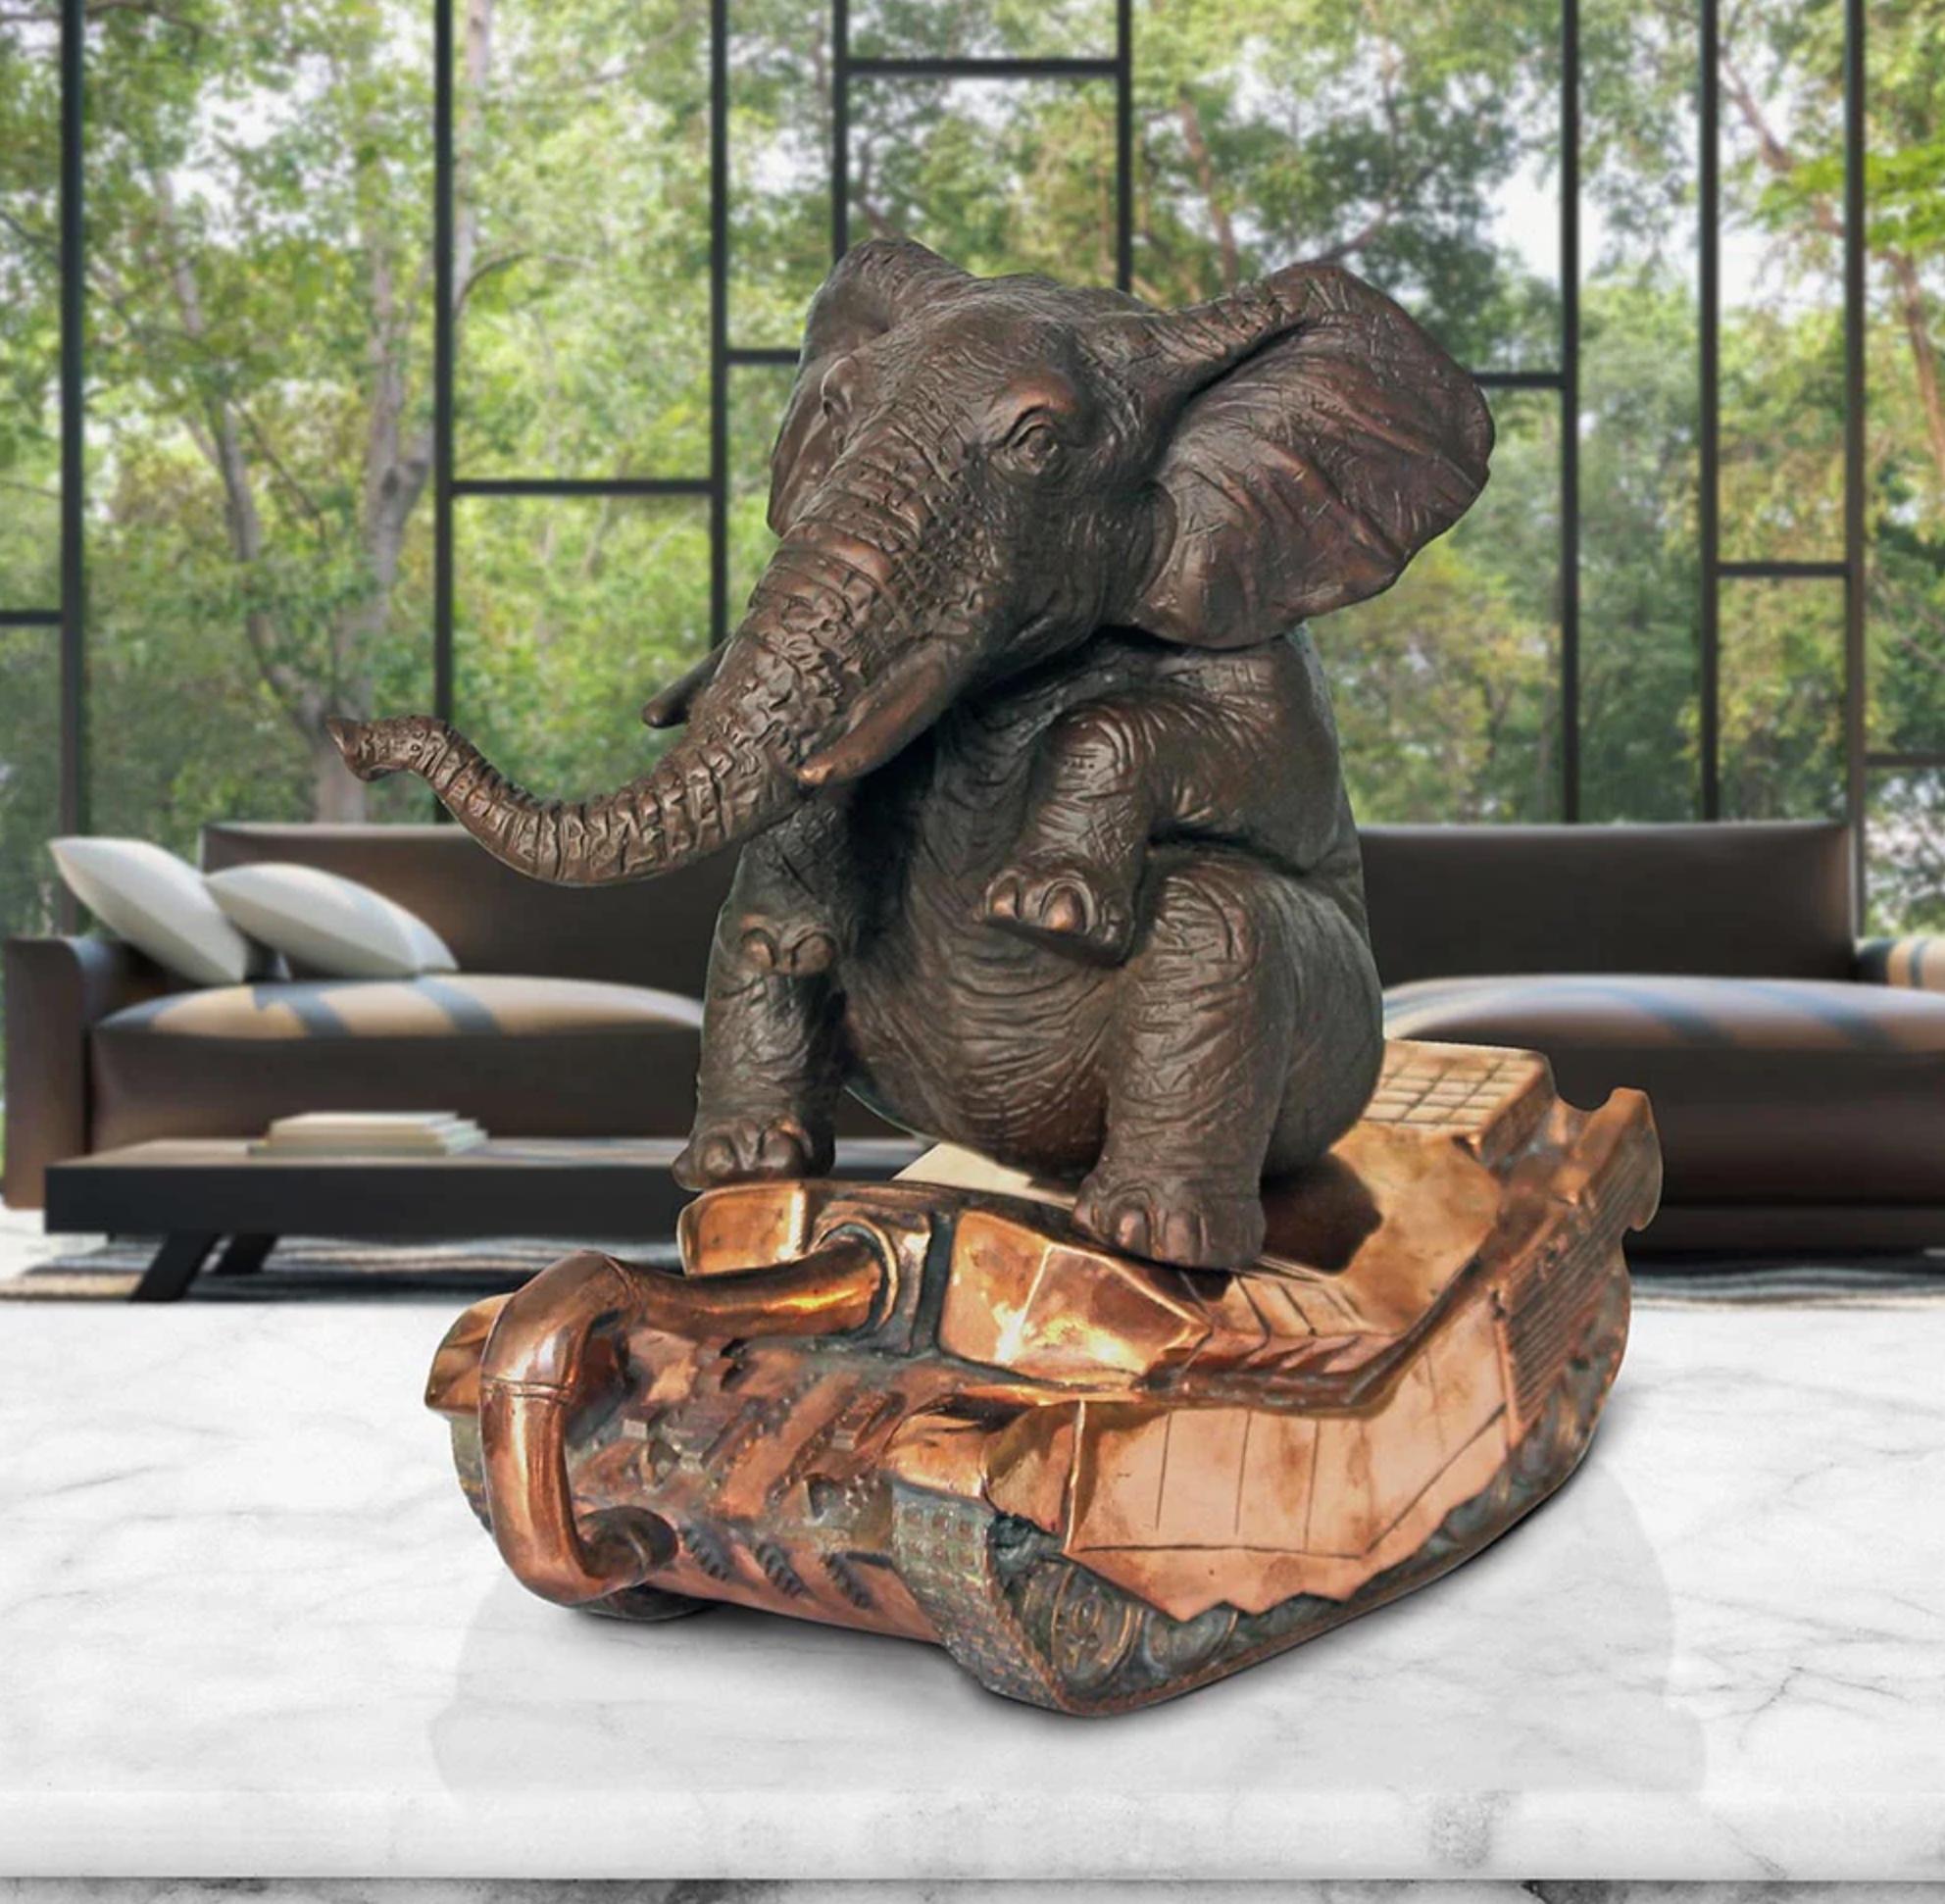 Authentic Bronze The elephant has a crush on... Sculpture by Gillie and Marc - Gold Figurative Sculpture by Gillie and Marc Schattner